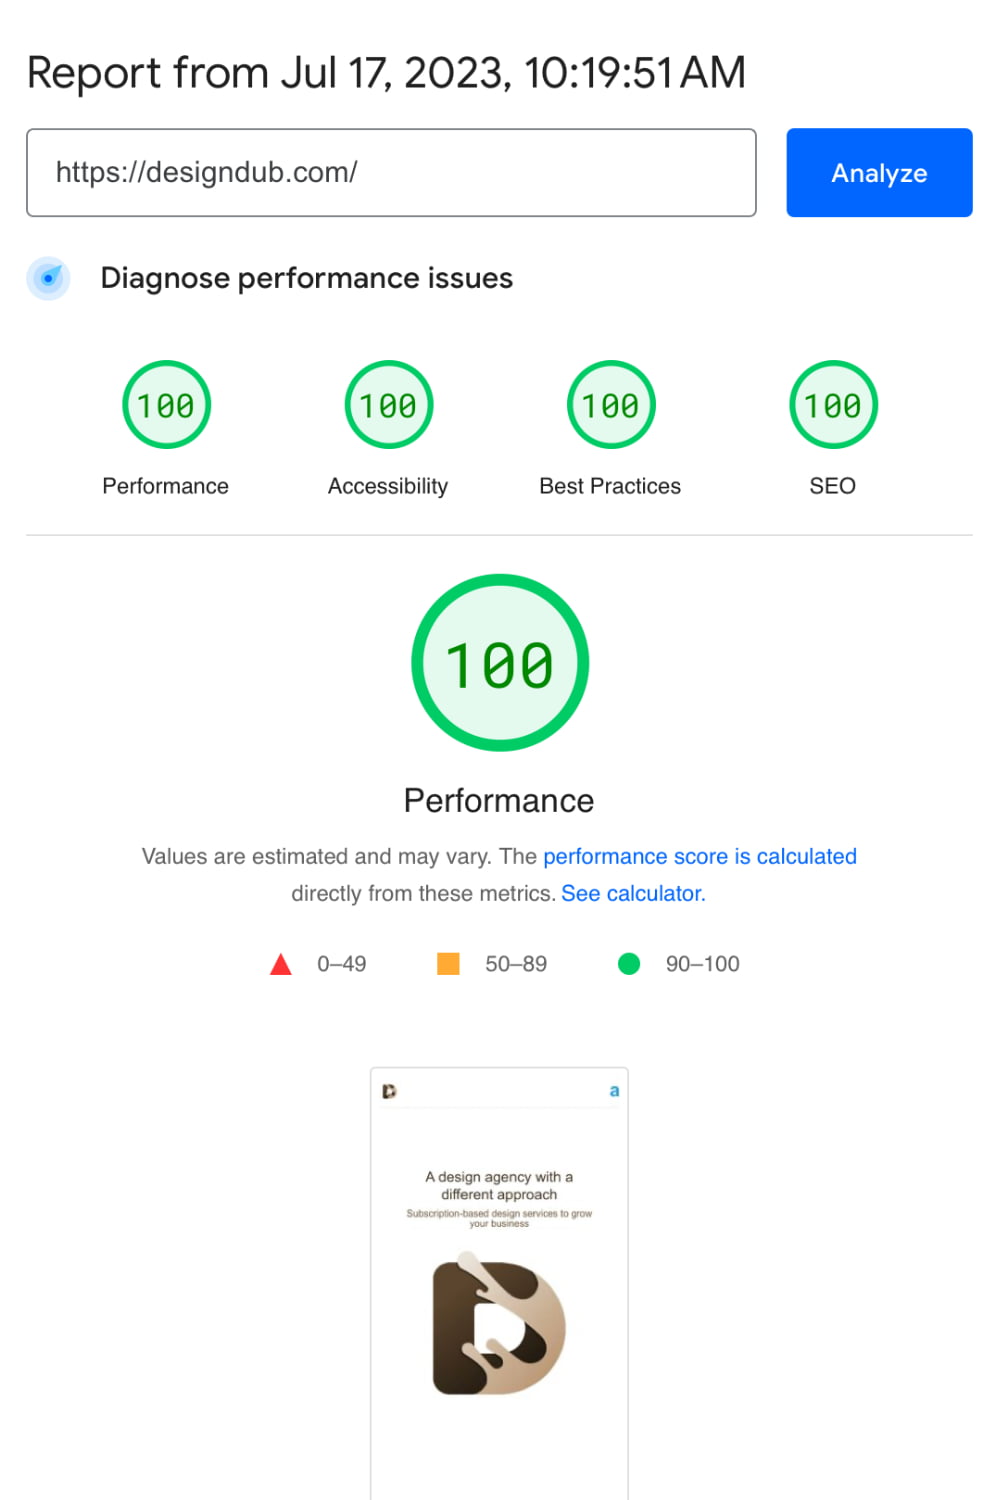 Screenshot of test by google page speed insights That shows that design dub scores 100%